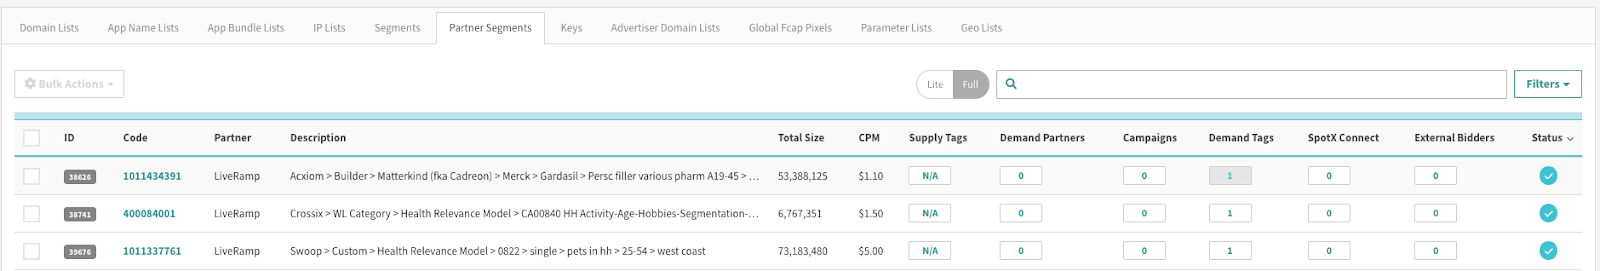 Full view of the partner segments table shows columns for supply tags, demand partners, campaigns, demand tags, spotx connect, and external bidders